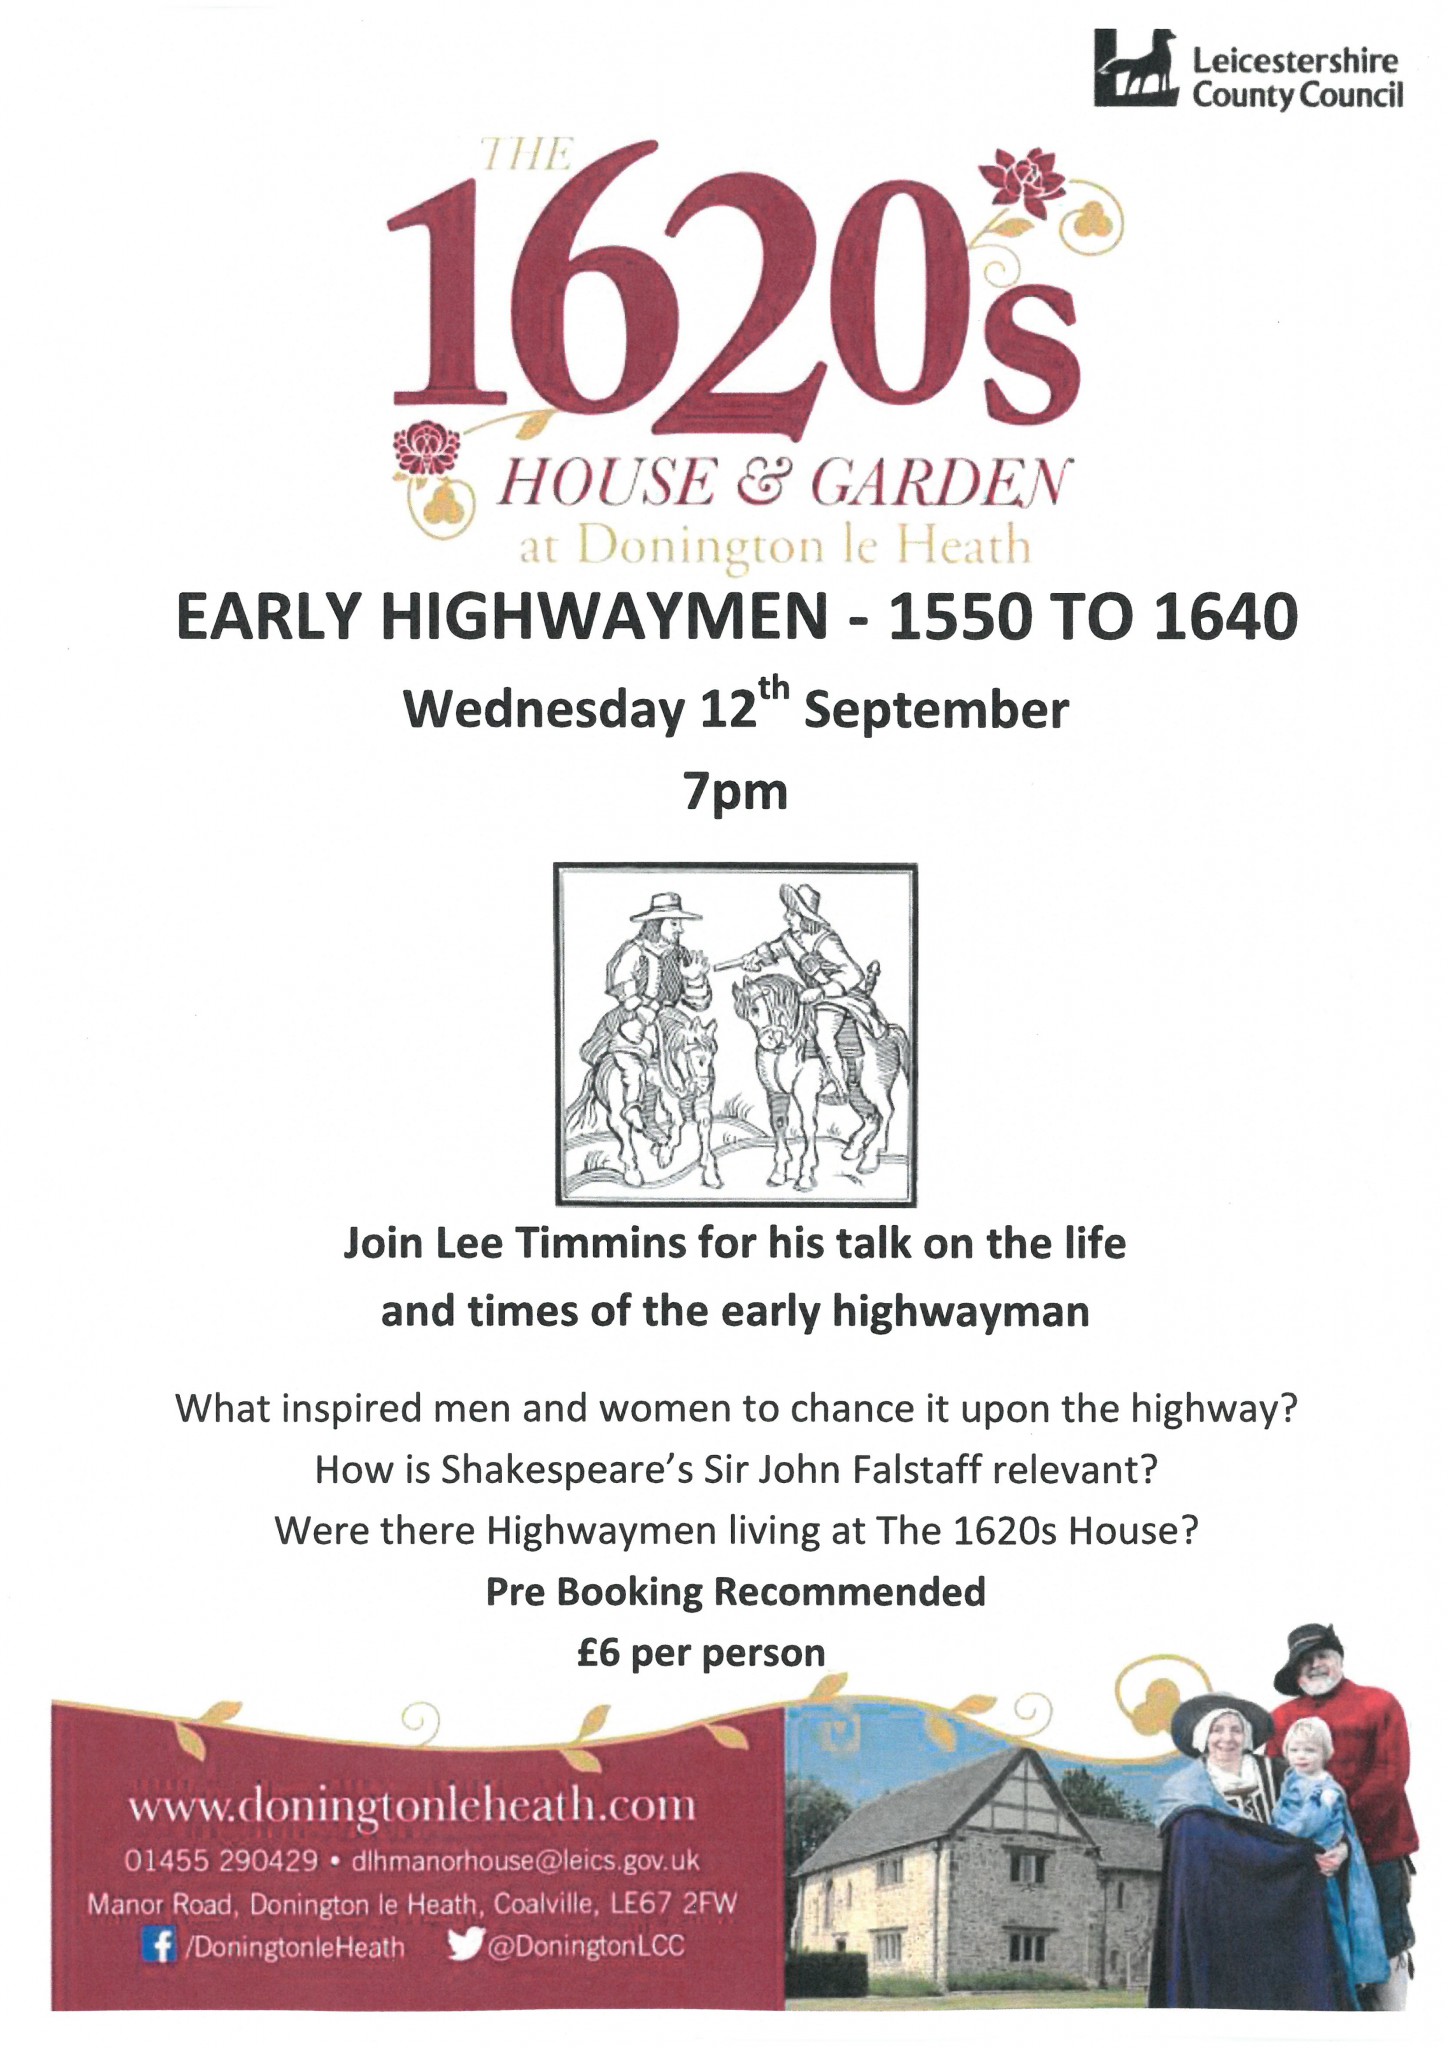 Early Highwaymen 1550 to 1640 Talk